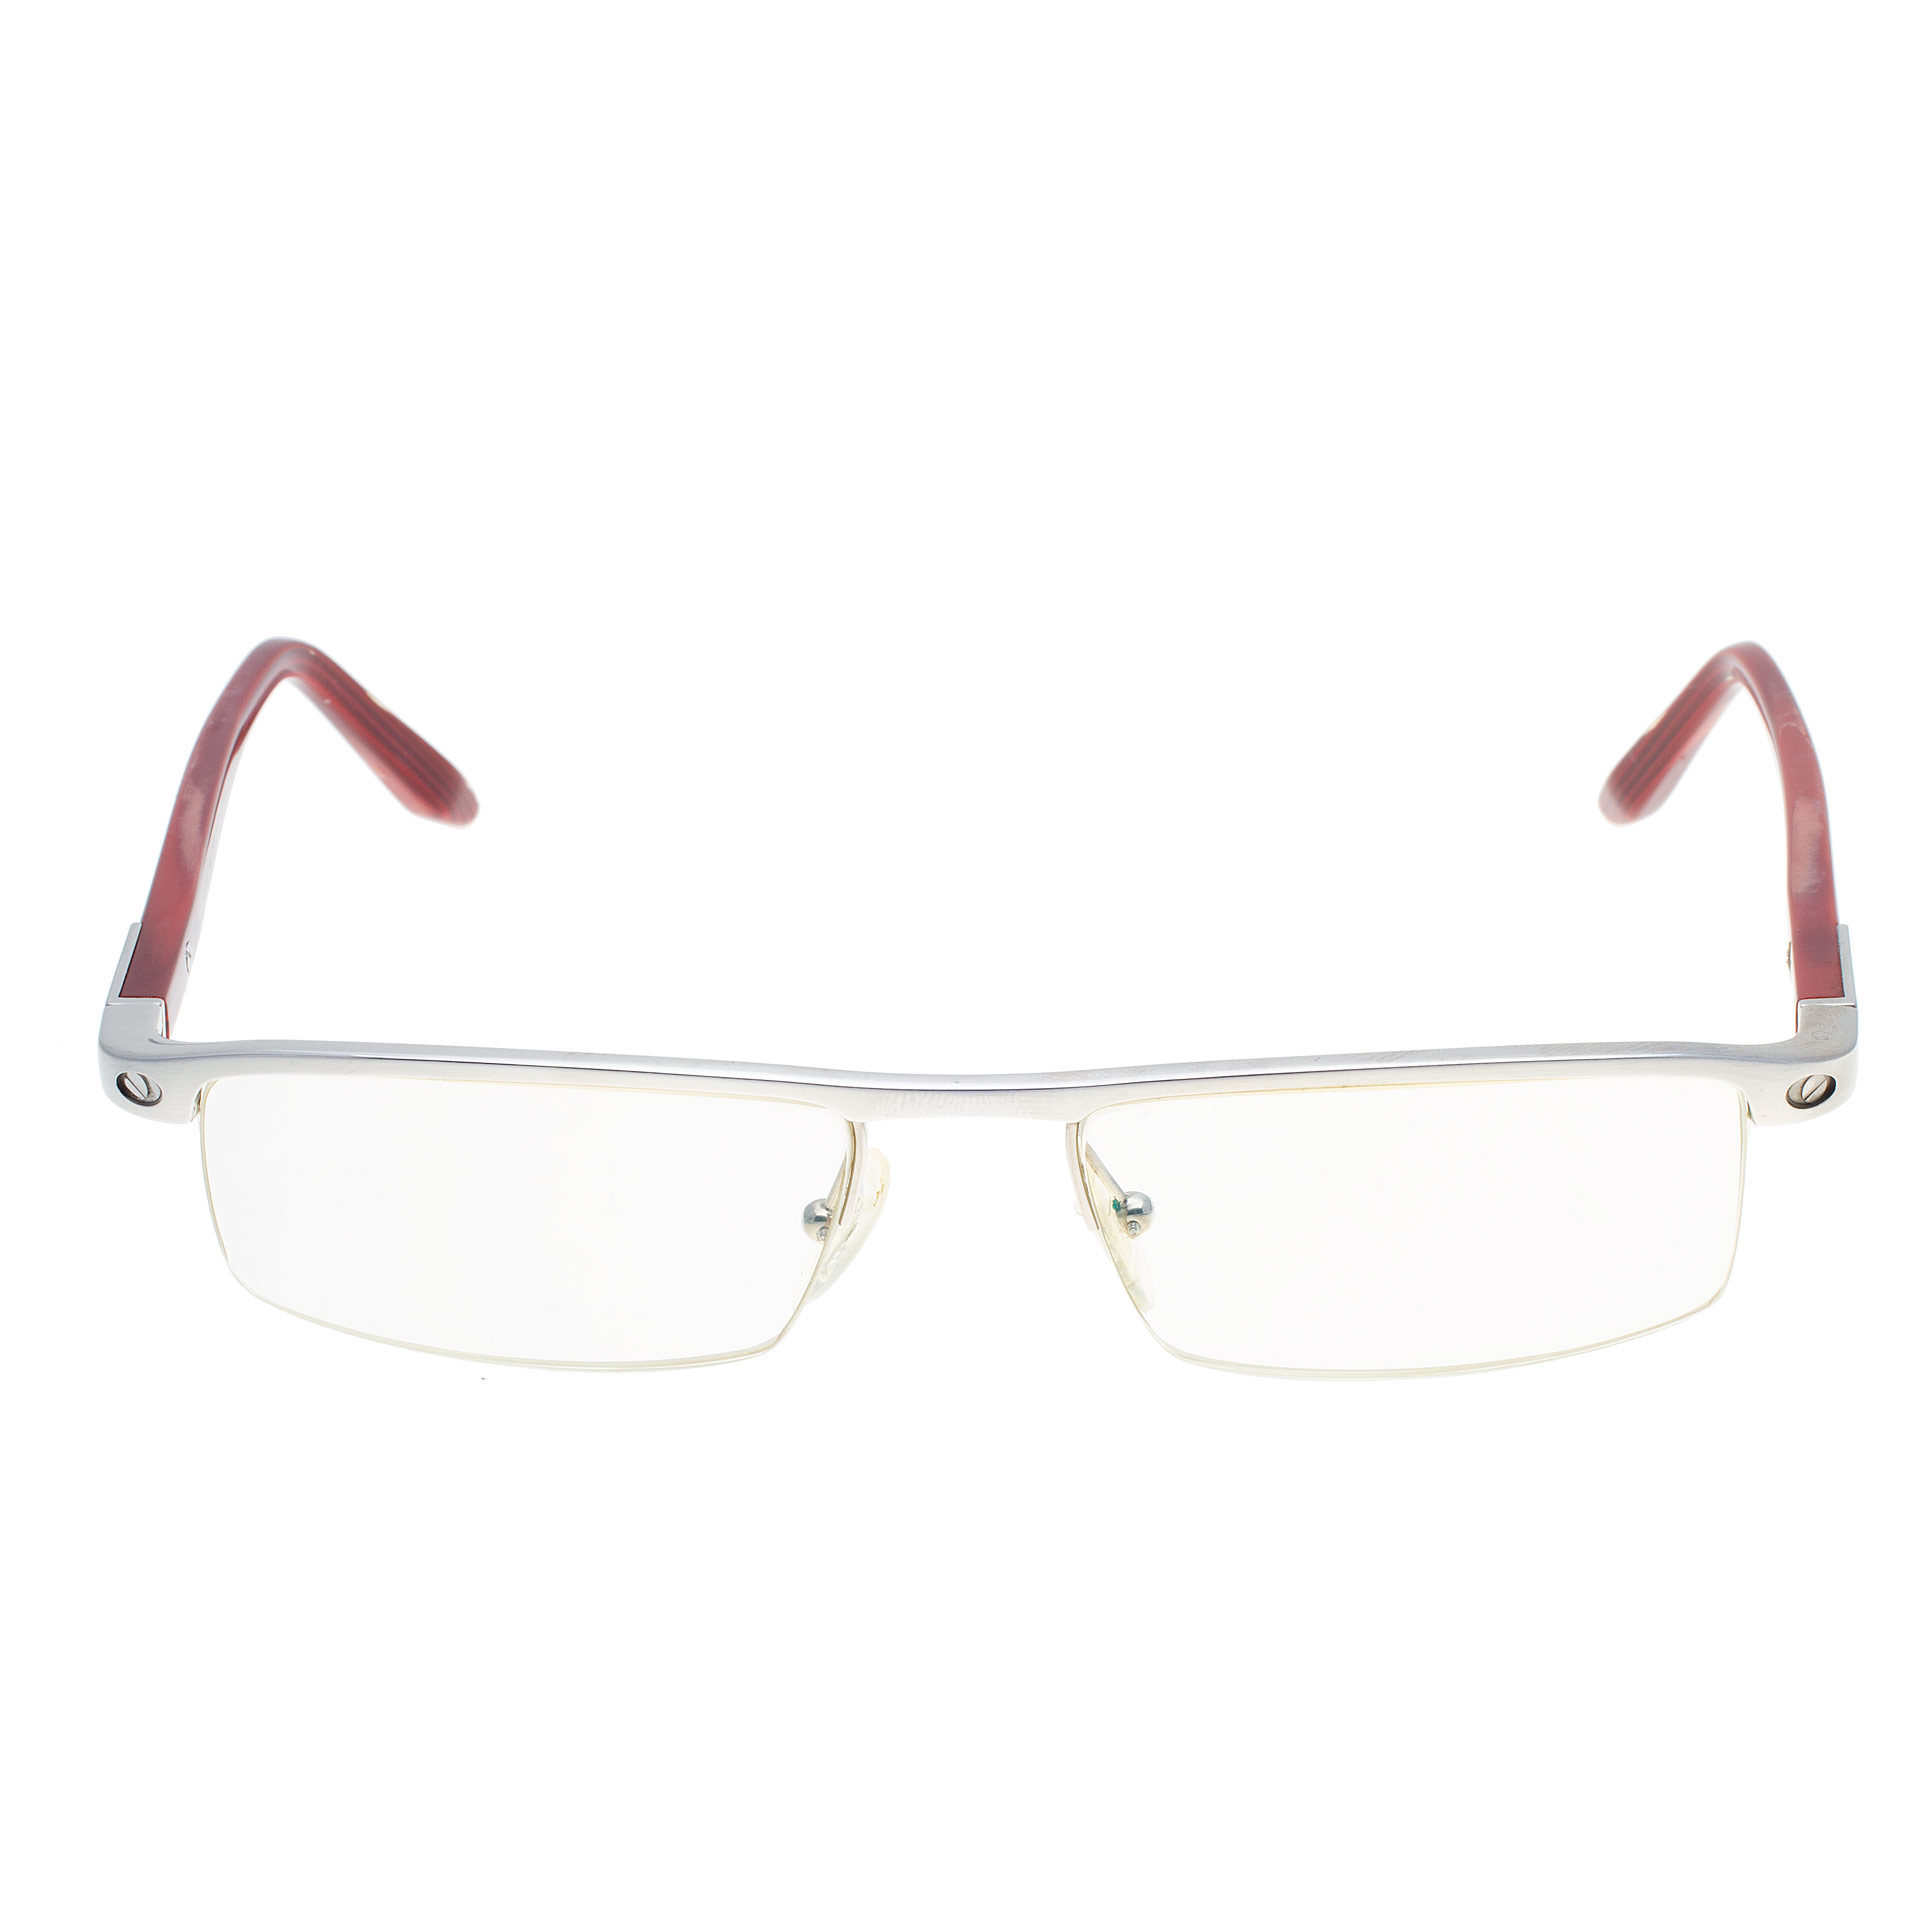 Cartier steel frame with wood stem glasses